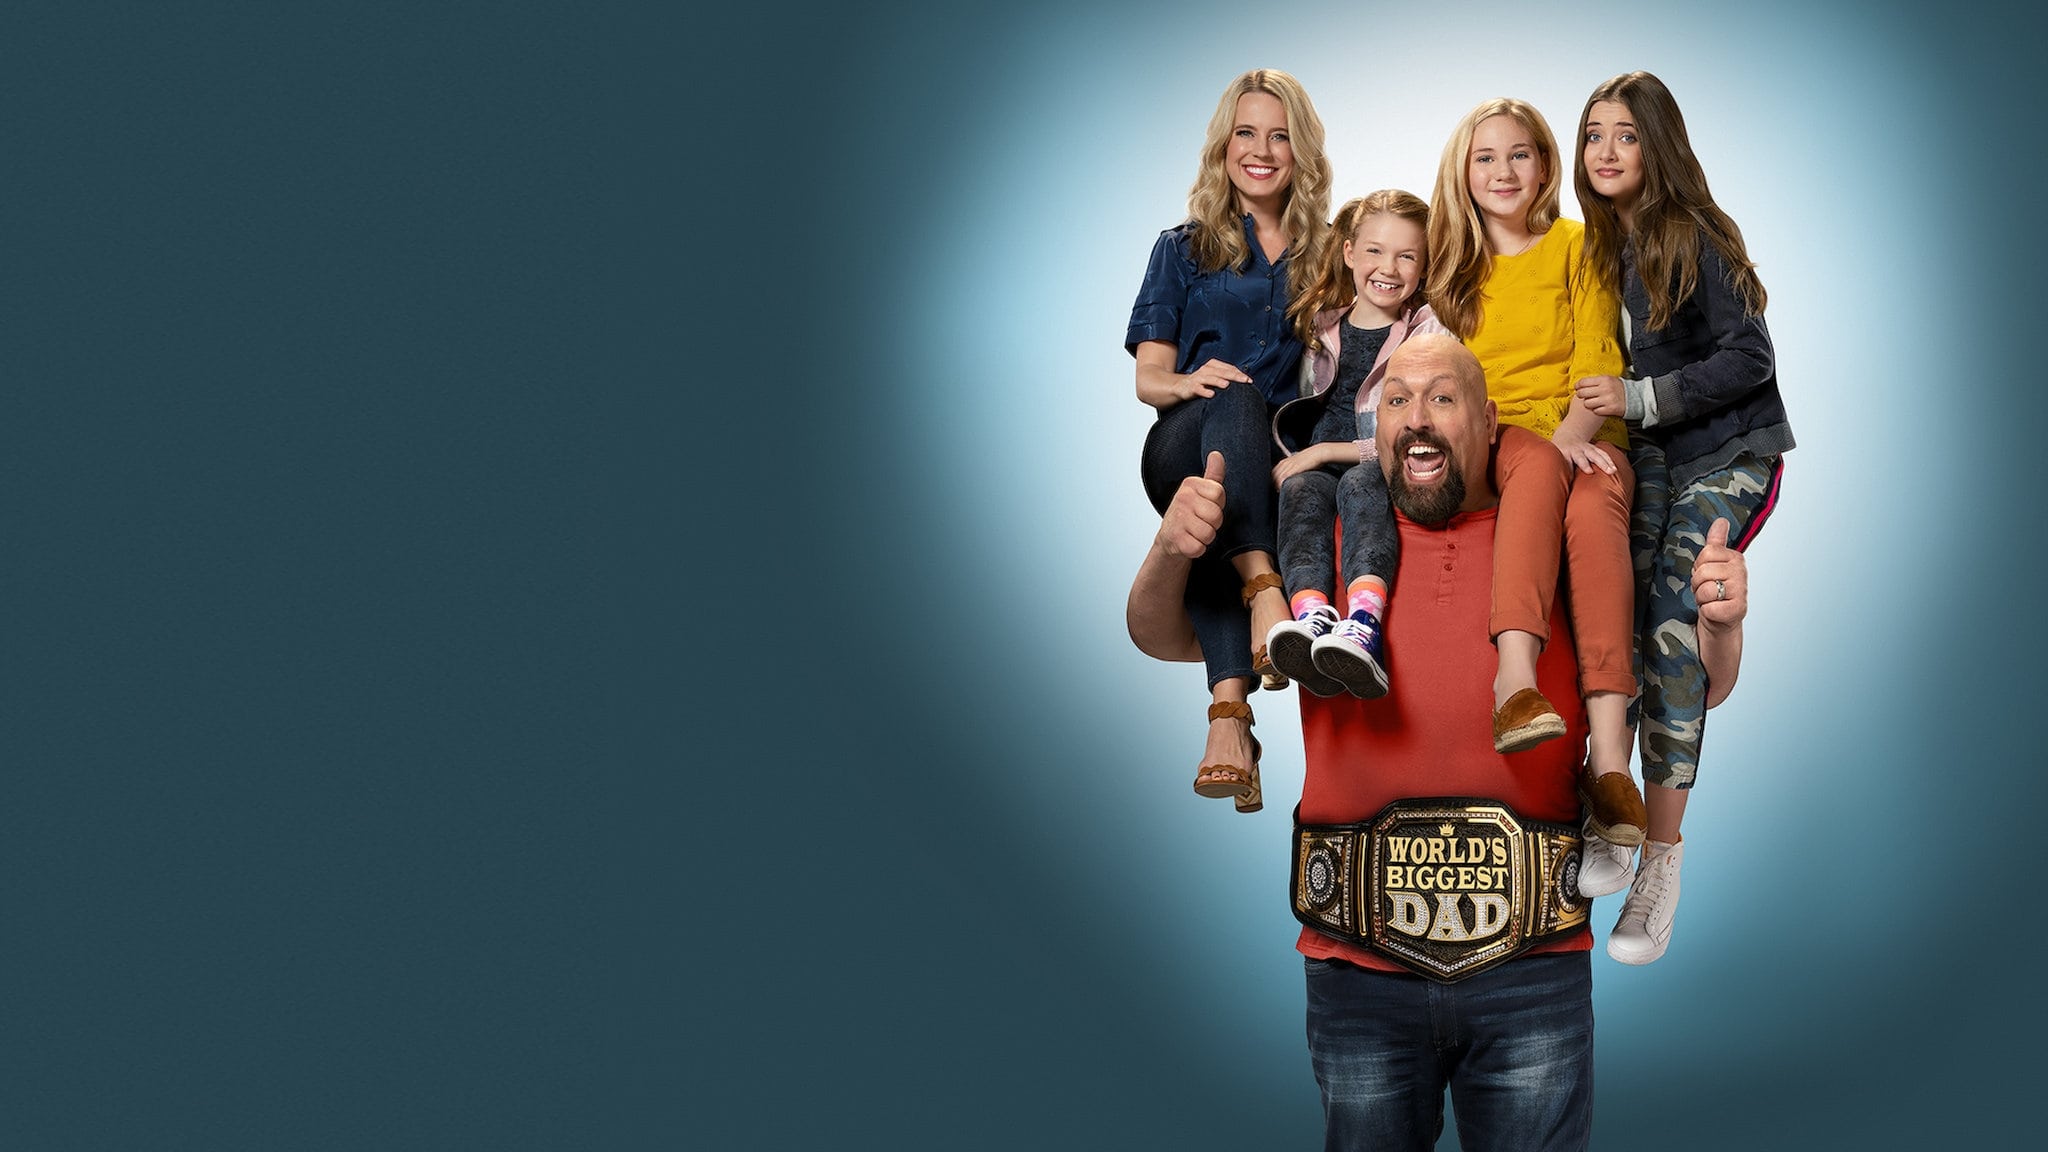 Voir serie The Big Show Show en streaming – 66Streaming